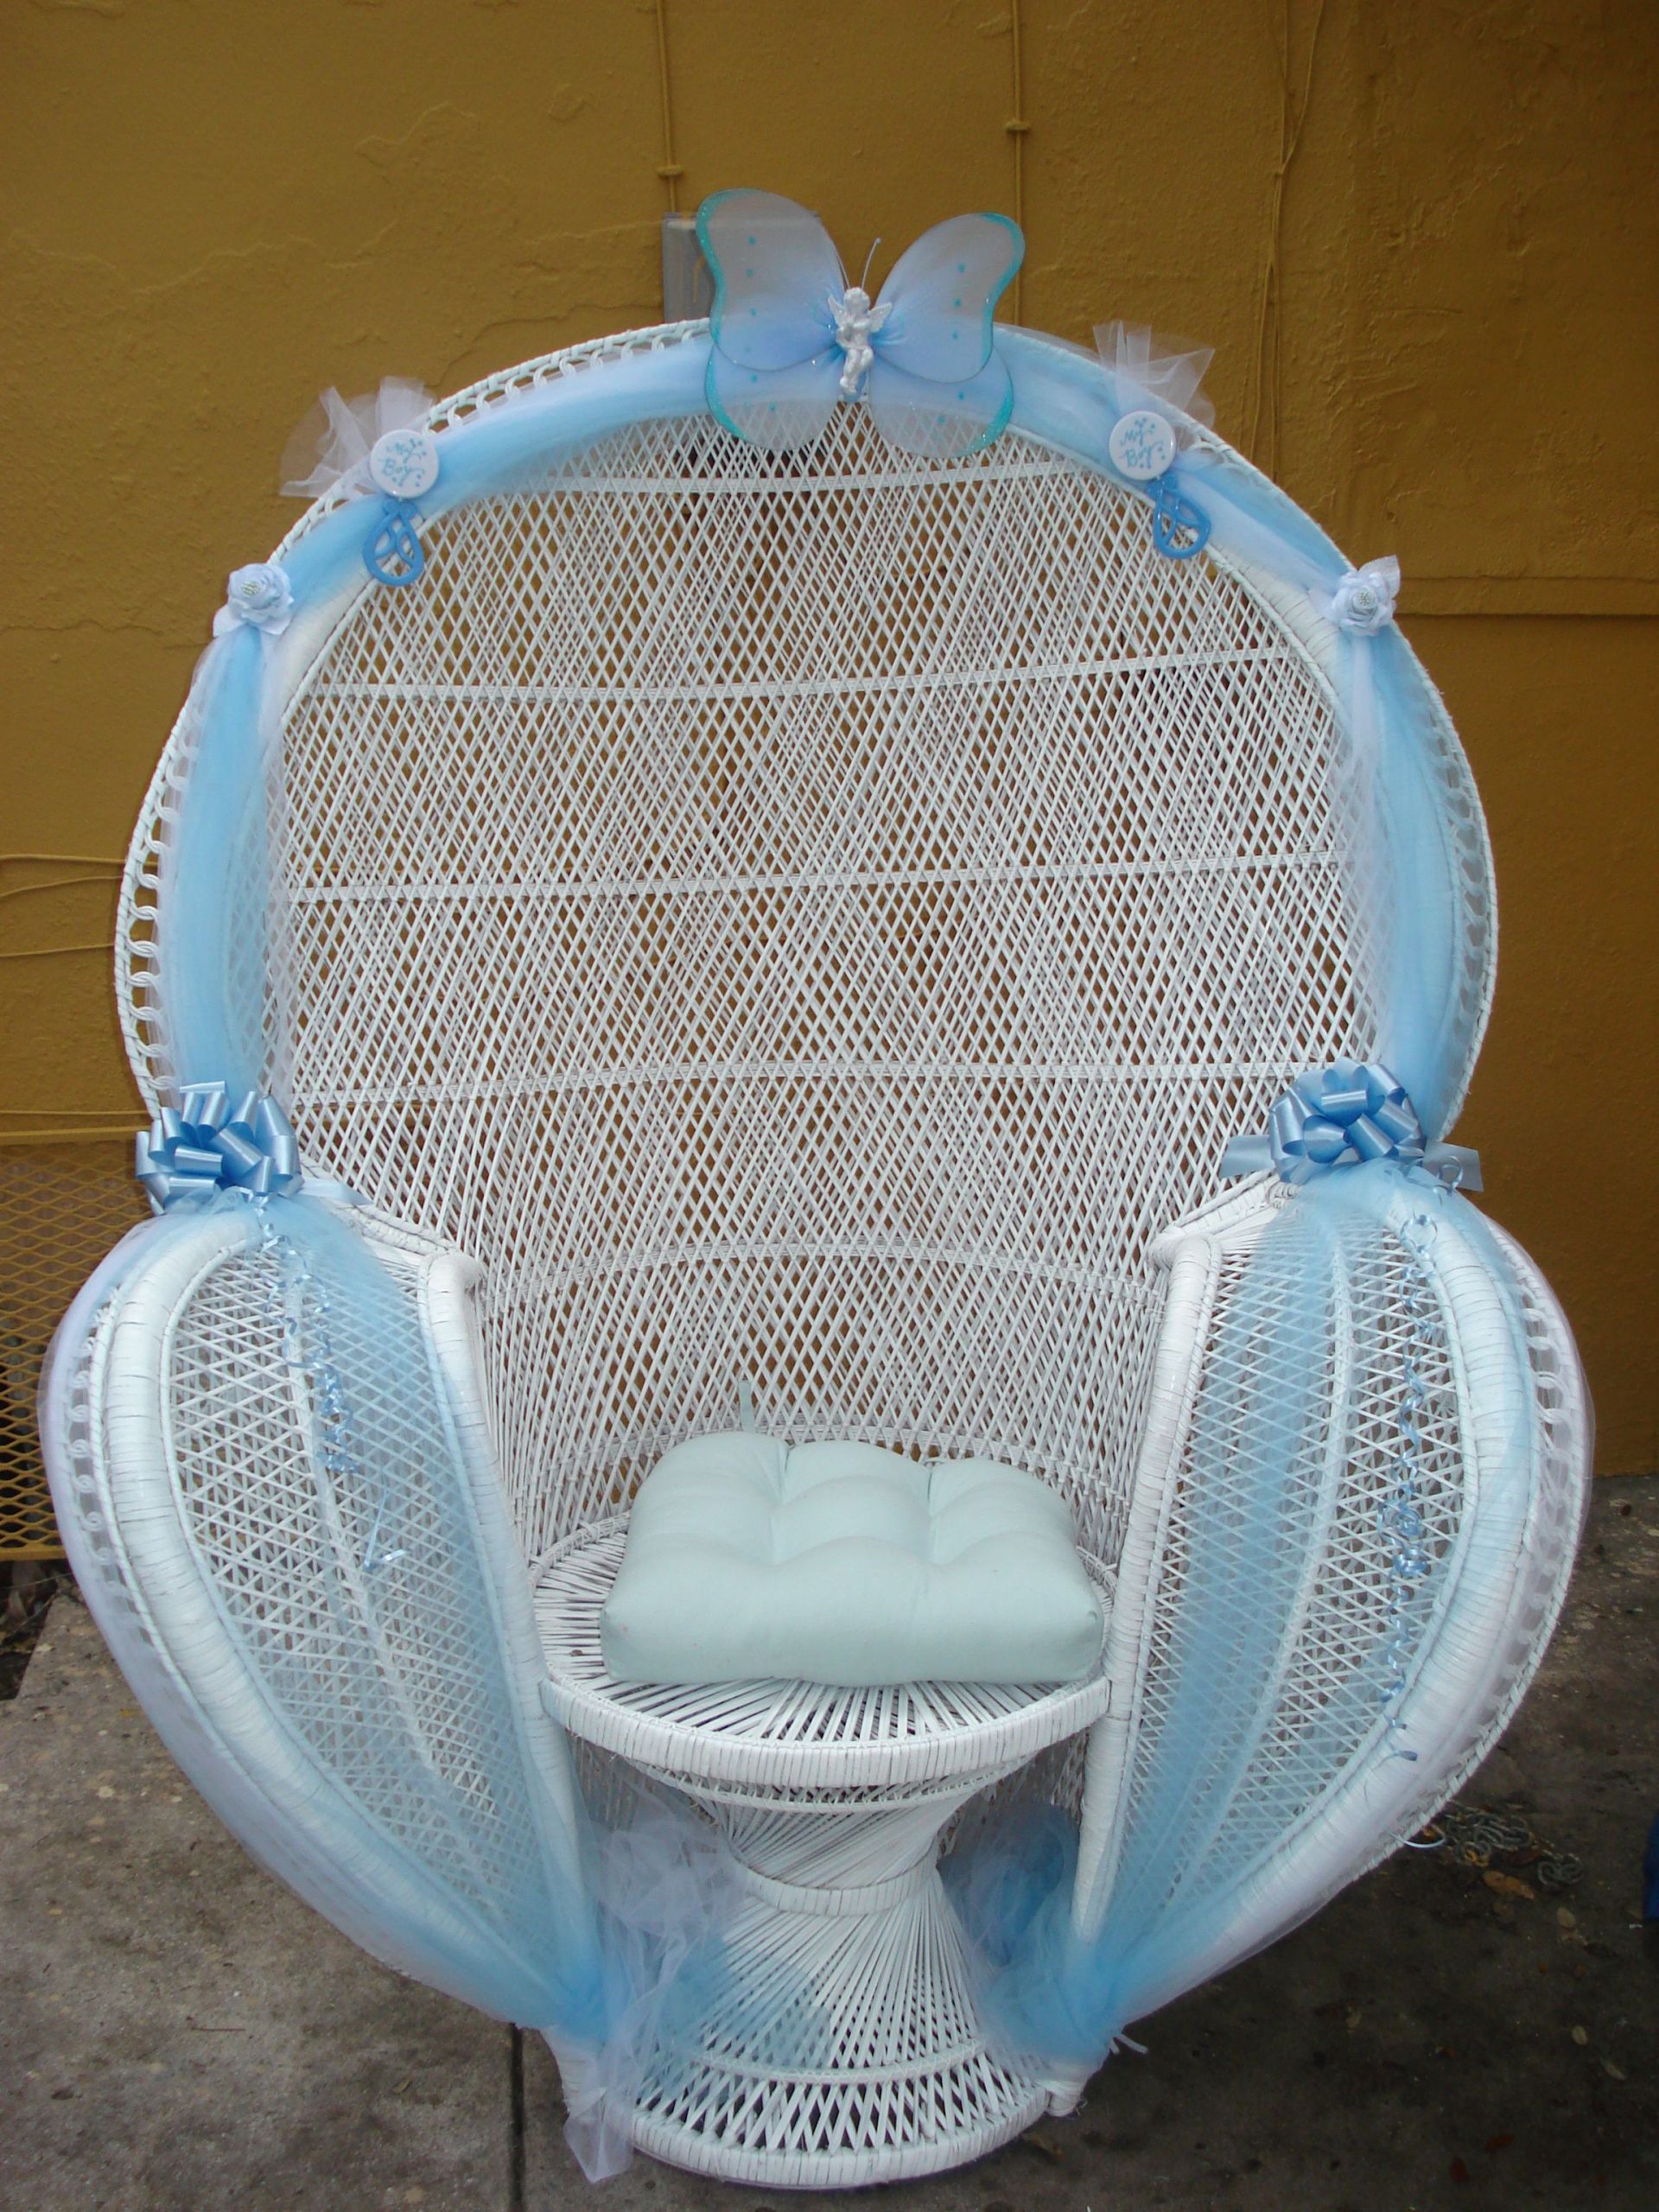 Baby Shower Chair Decoration Ideas
 Baby Shower Chairs on Pinterest